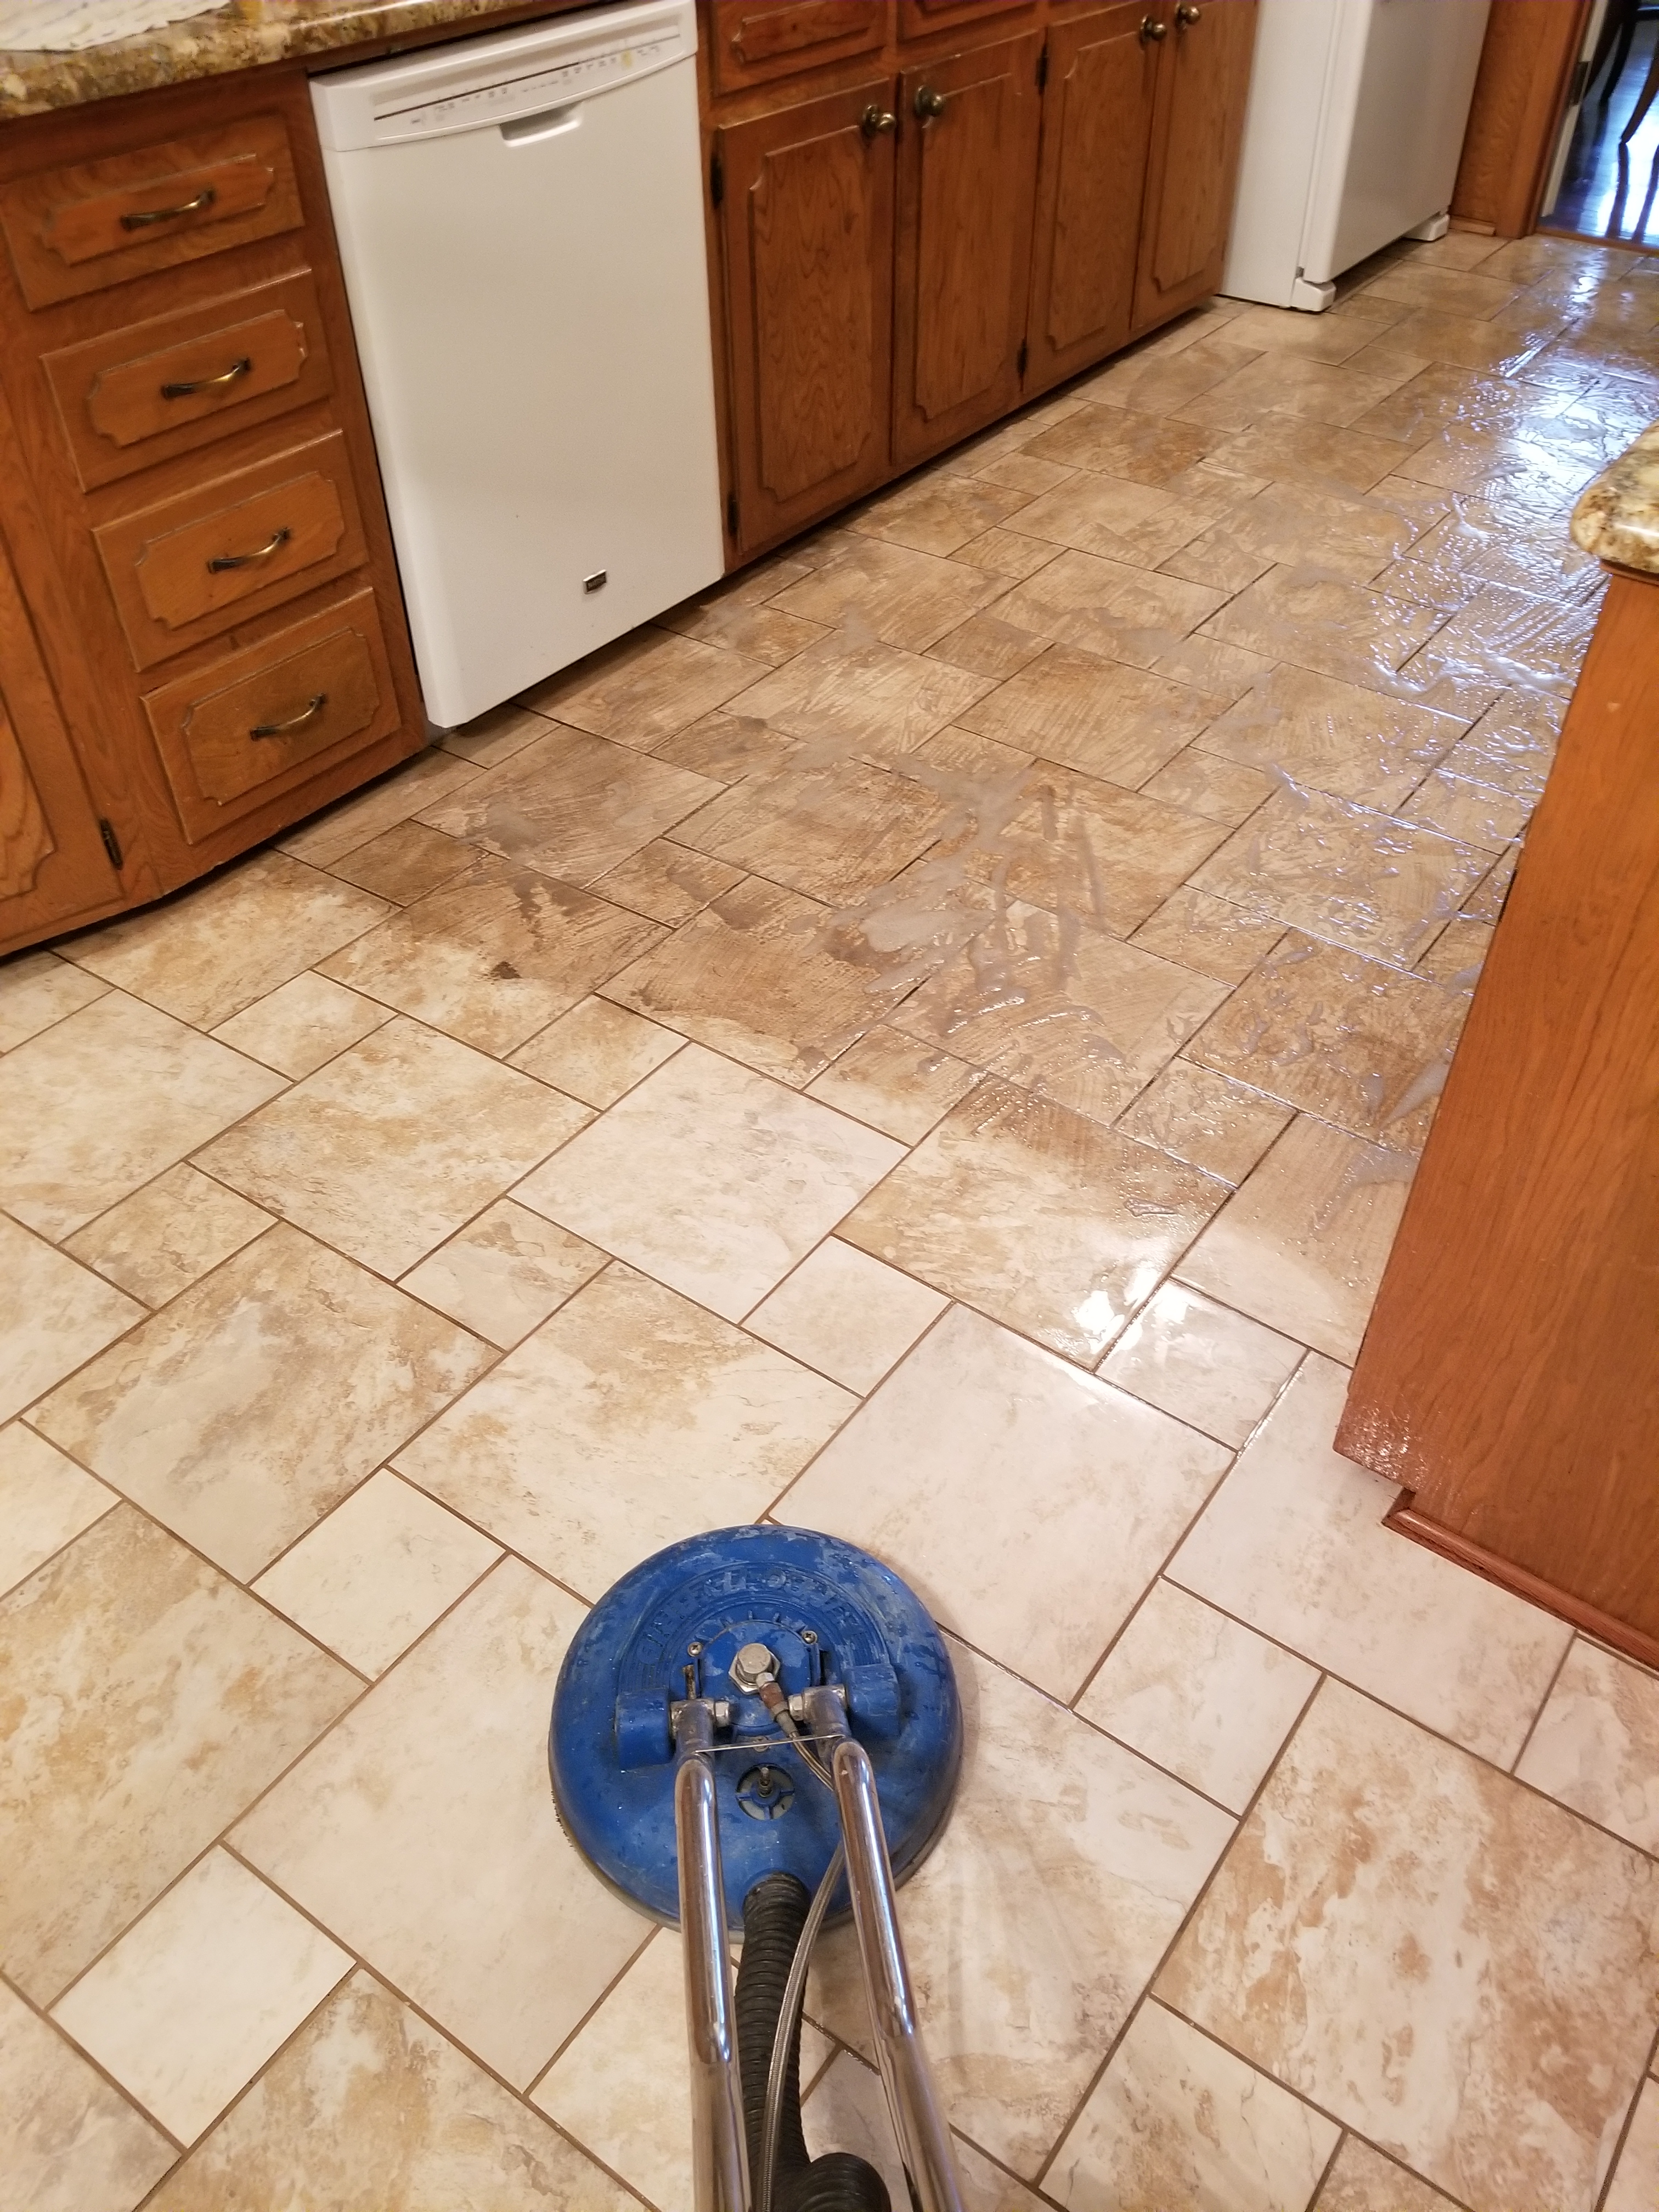 A tiled kitchen floor we cleaned on 3/12/17